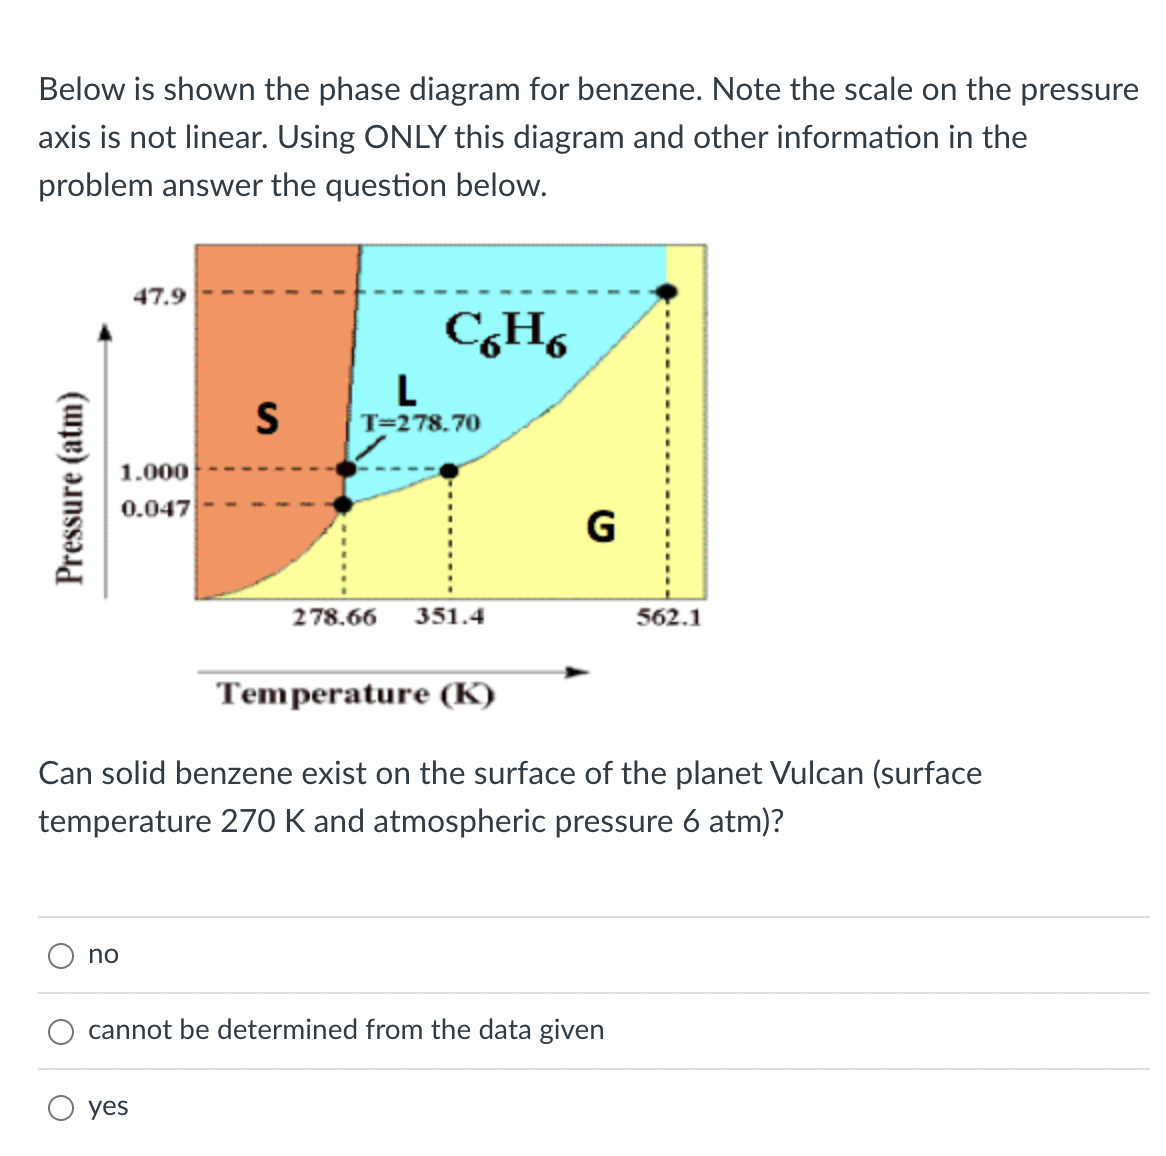 Below is shown the phase diagram for benzene. Note the scale on the pressure
axis is not linear. Using ONLY this diagram and other information in the
problem answer the question below.
47.9
C,H,
L
T=278.70
1.000
0.047
G
278.66
351.4
562.1
Temperature (K)
Can solid benzene exist on the surface of the planet Vulcan (surface
temperature 270 K and atmospheric pressure 6 atm)?
no
cannot be determined from the data given
yes
Pressure (atm)
